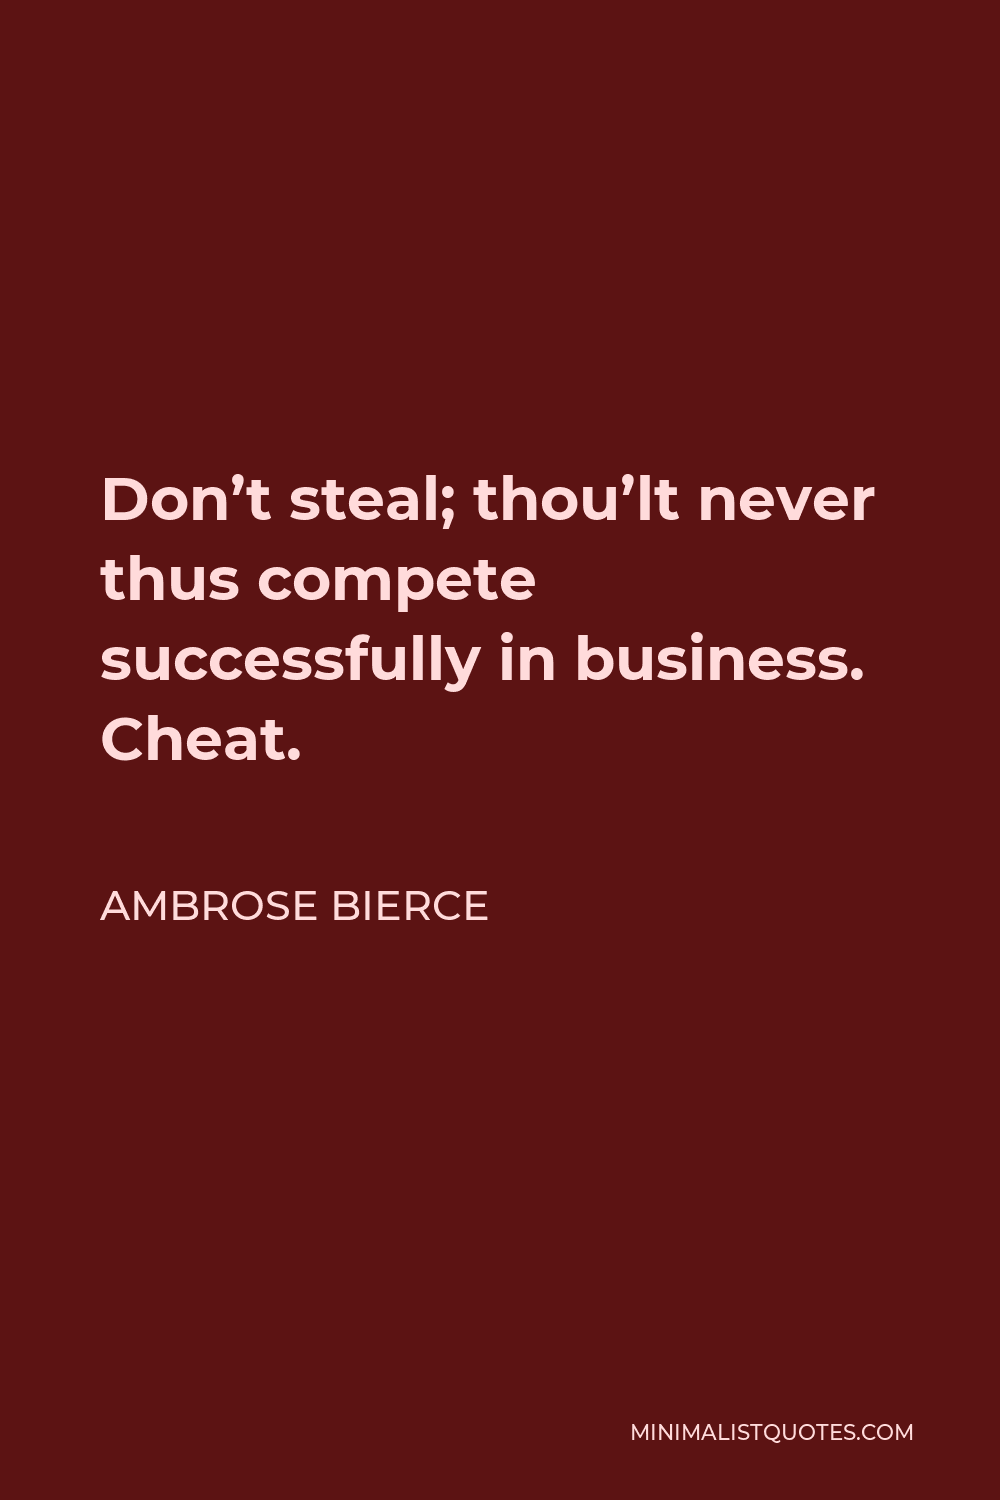 Ambrose Bierce Quote - Don’t steal; thou’lt never thus compete successfully in business. Cheat.